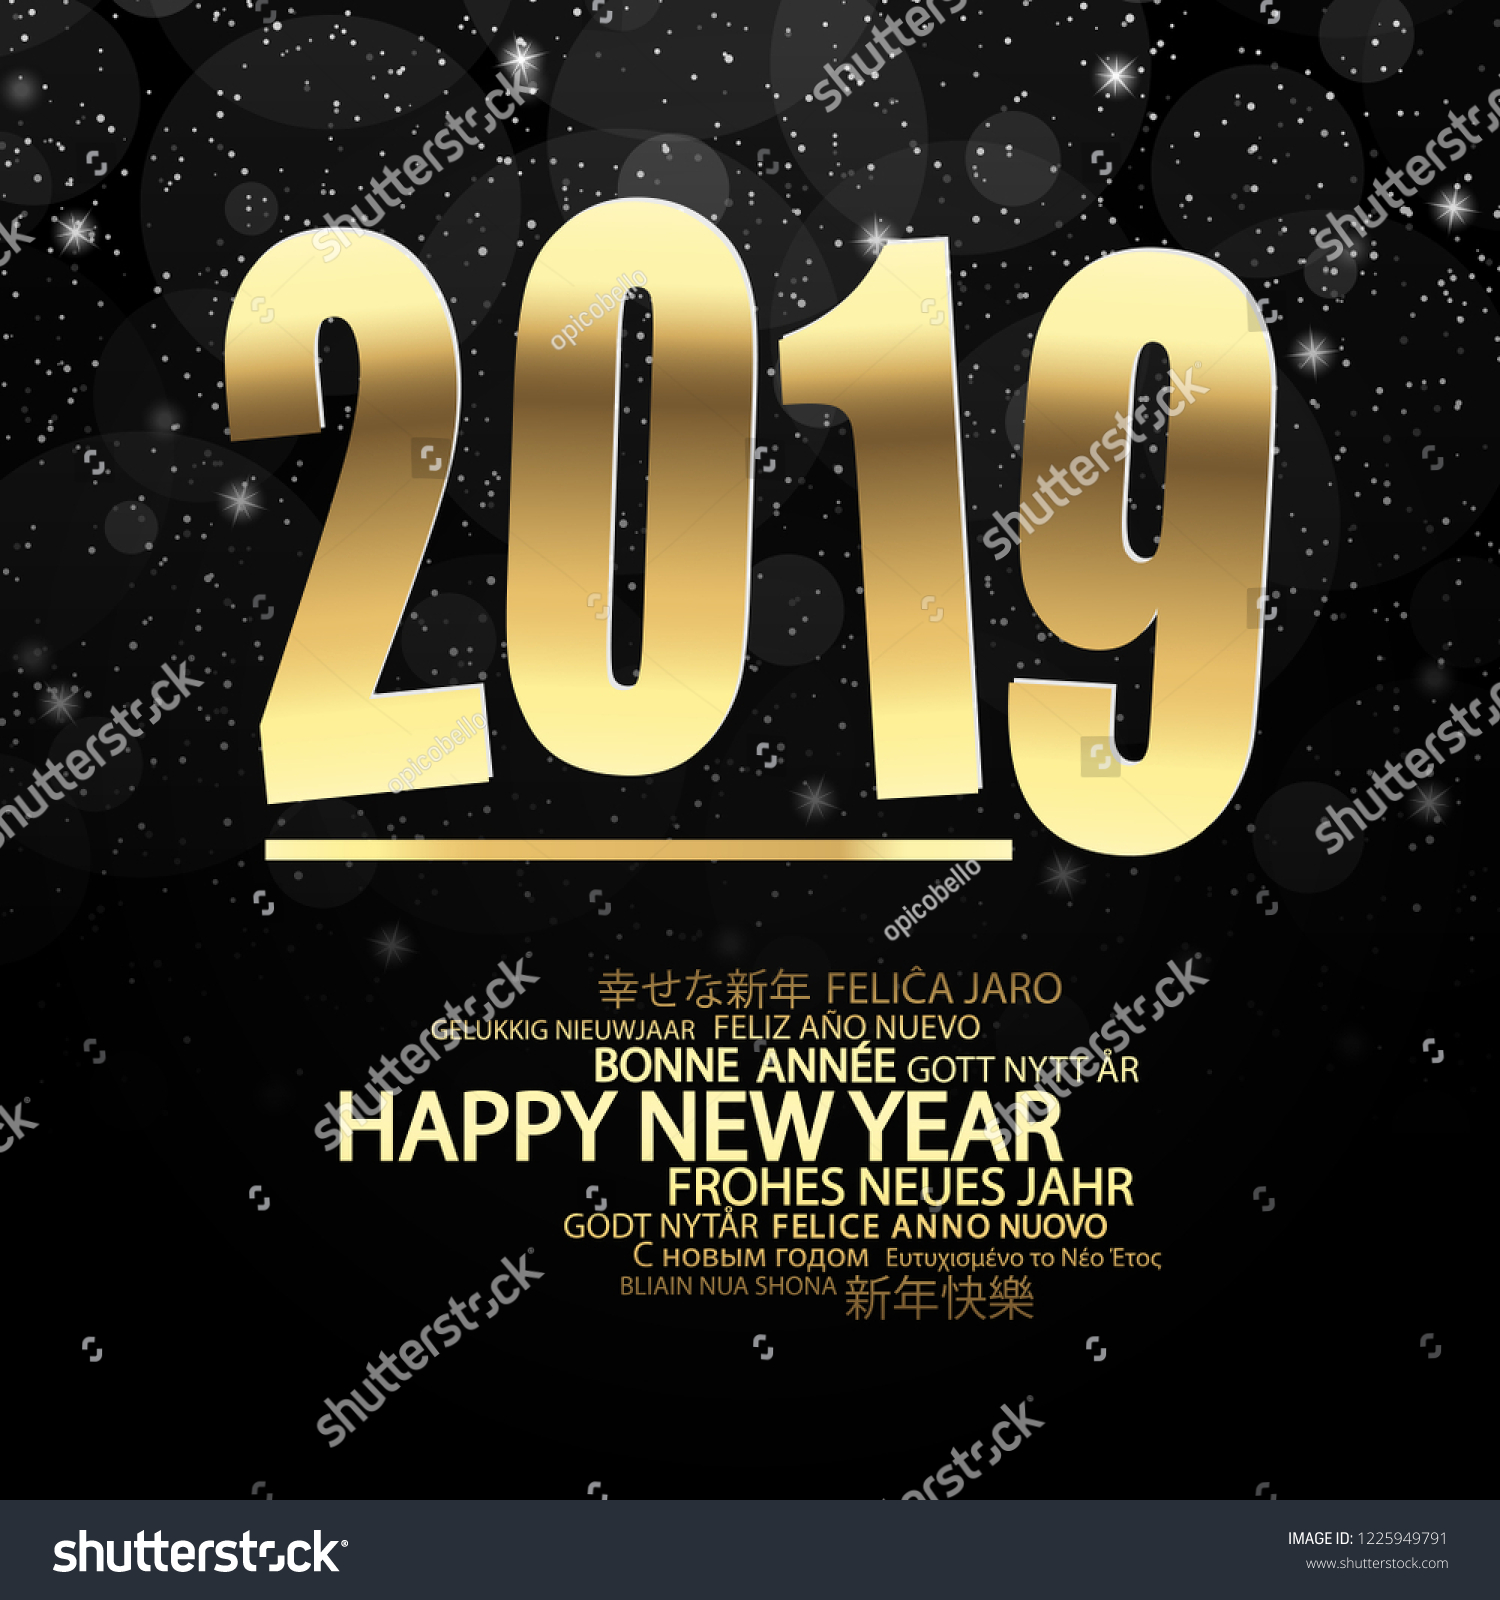 golden colored background concept for New Year 2019 greetings with falling snow #1225949791